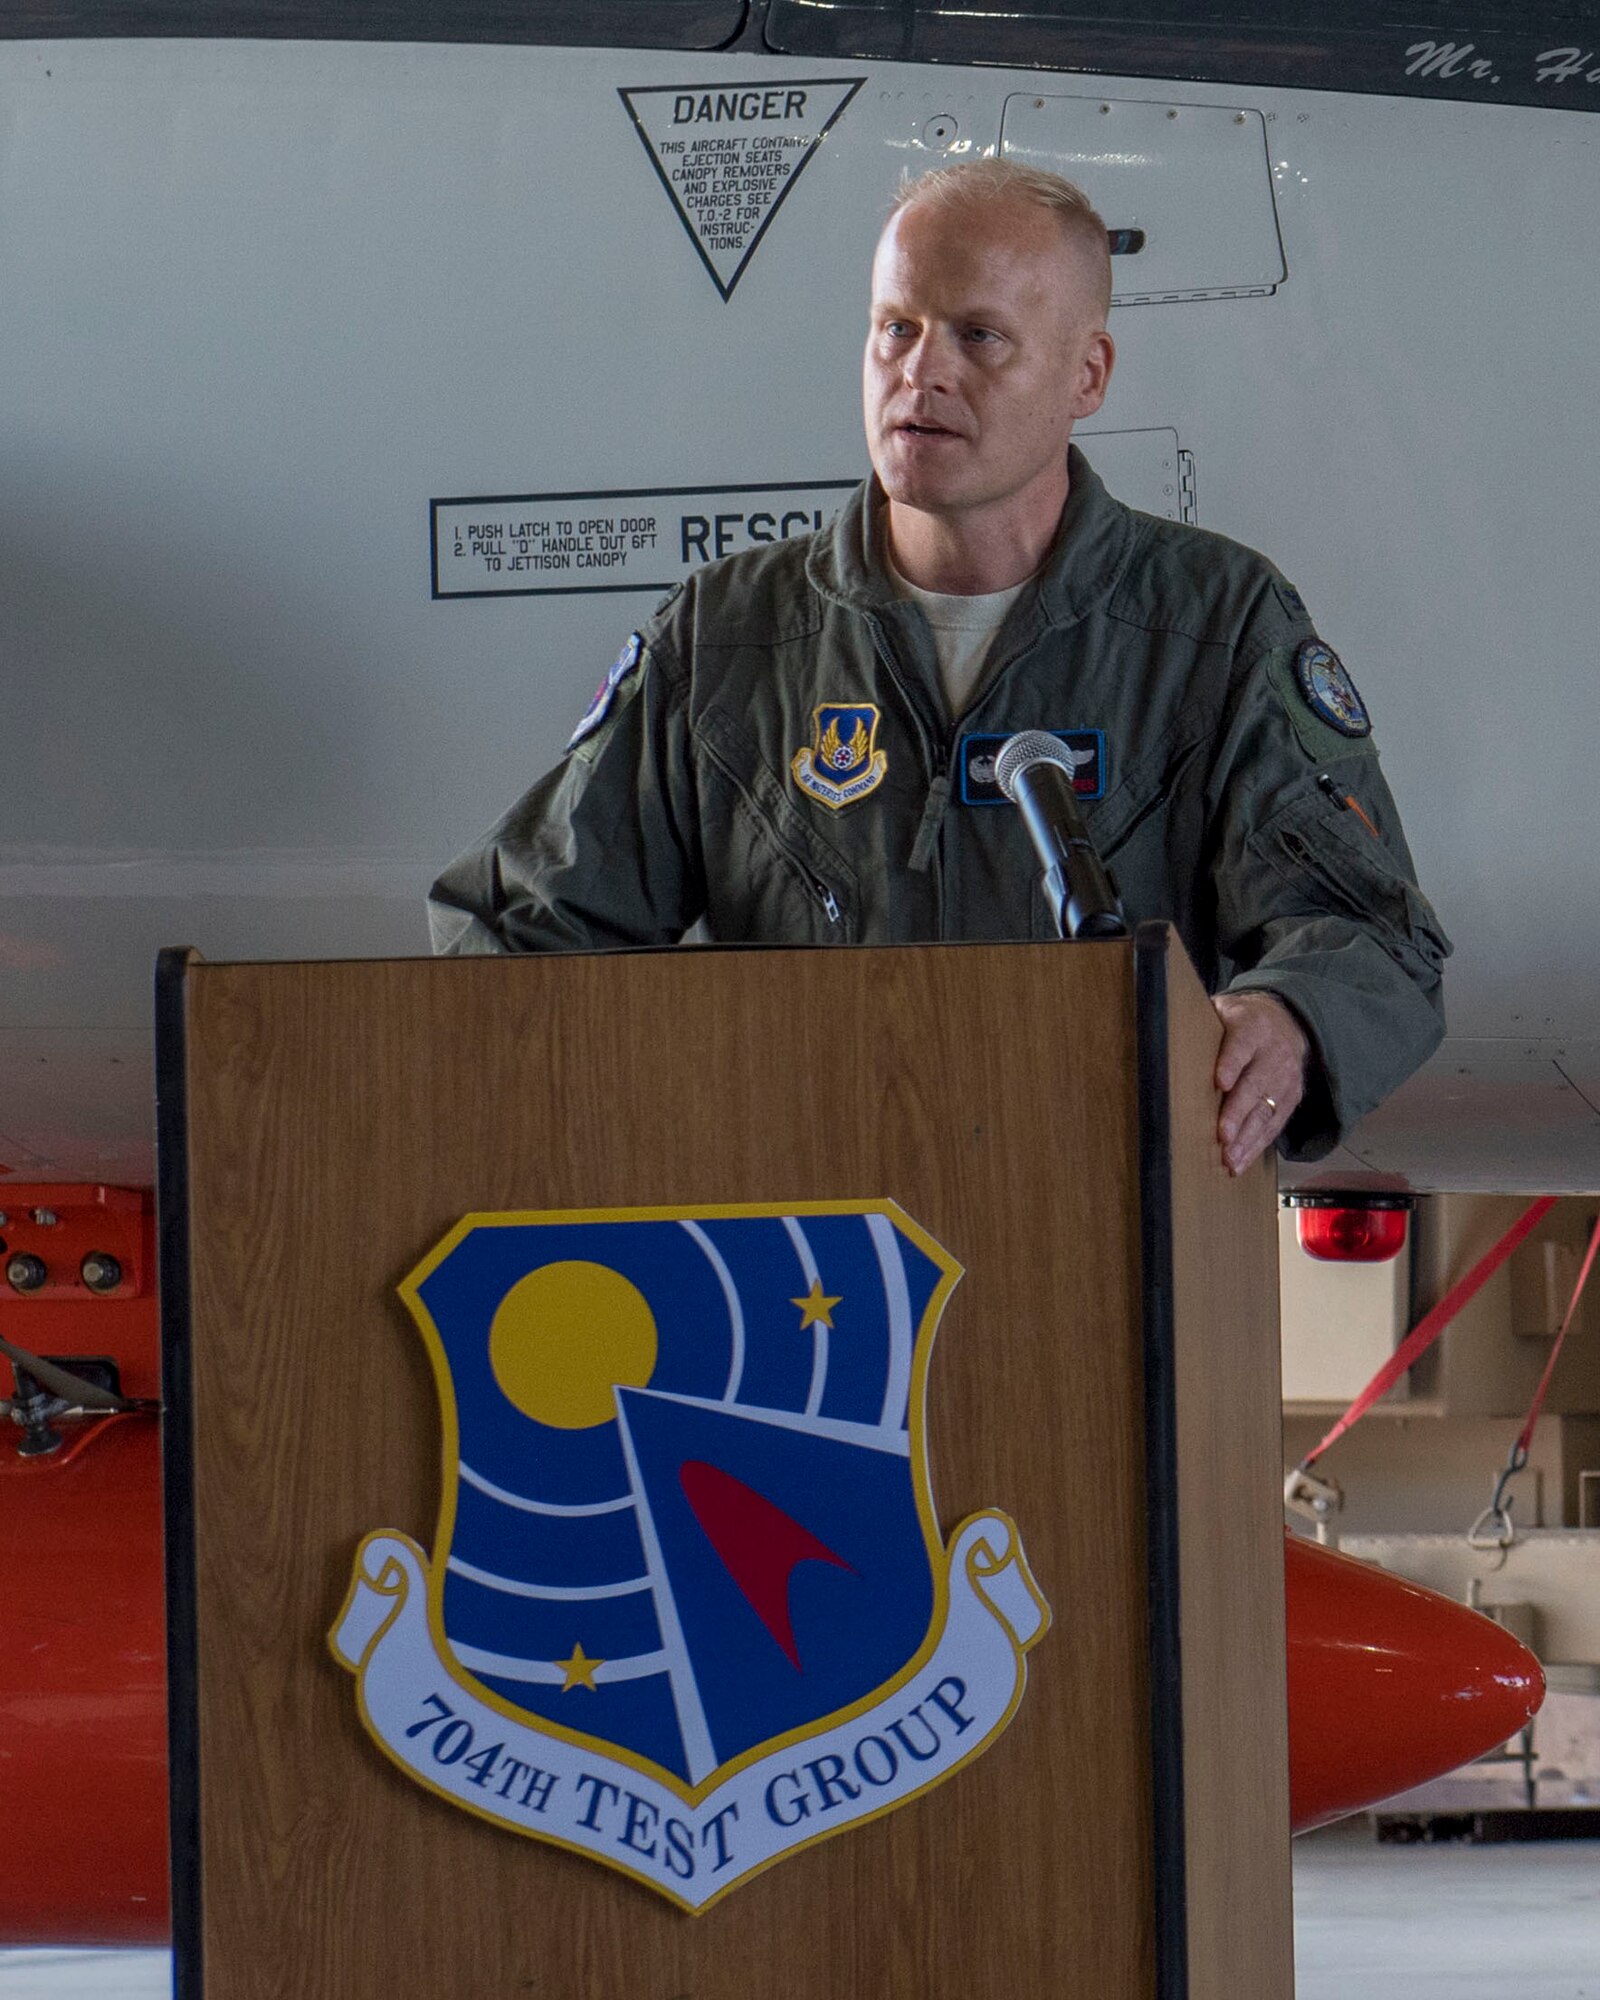 Col. Darren Wees speaks during a Change of Command ceremony July 1 at Holloman Air Force Base, New Mexico. On that date, Wees officially assumed command of the 704th Test Group. (U.S. Air Force photo by Airman 1st Class Quion Lowe)